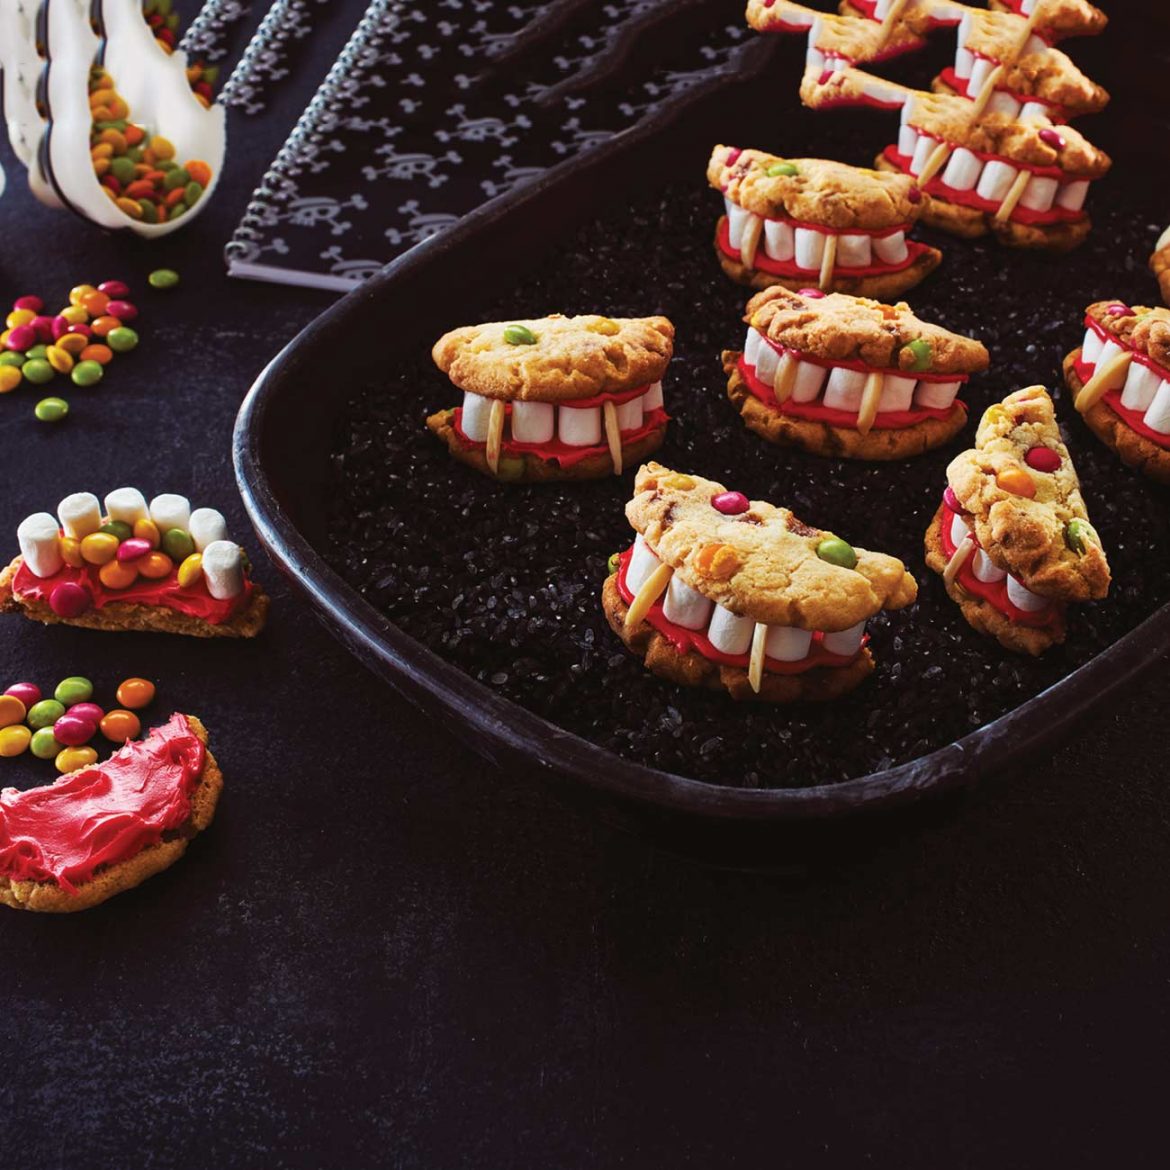 Halloween falls on a school day this year! To help the kids get into the Halloween spirit you could create a Halloween lunch box with some of these spooky Halloween lunchbox snack ideas for kids.